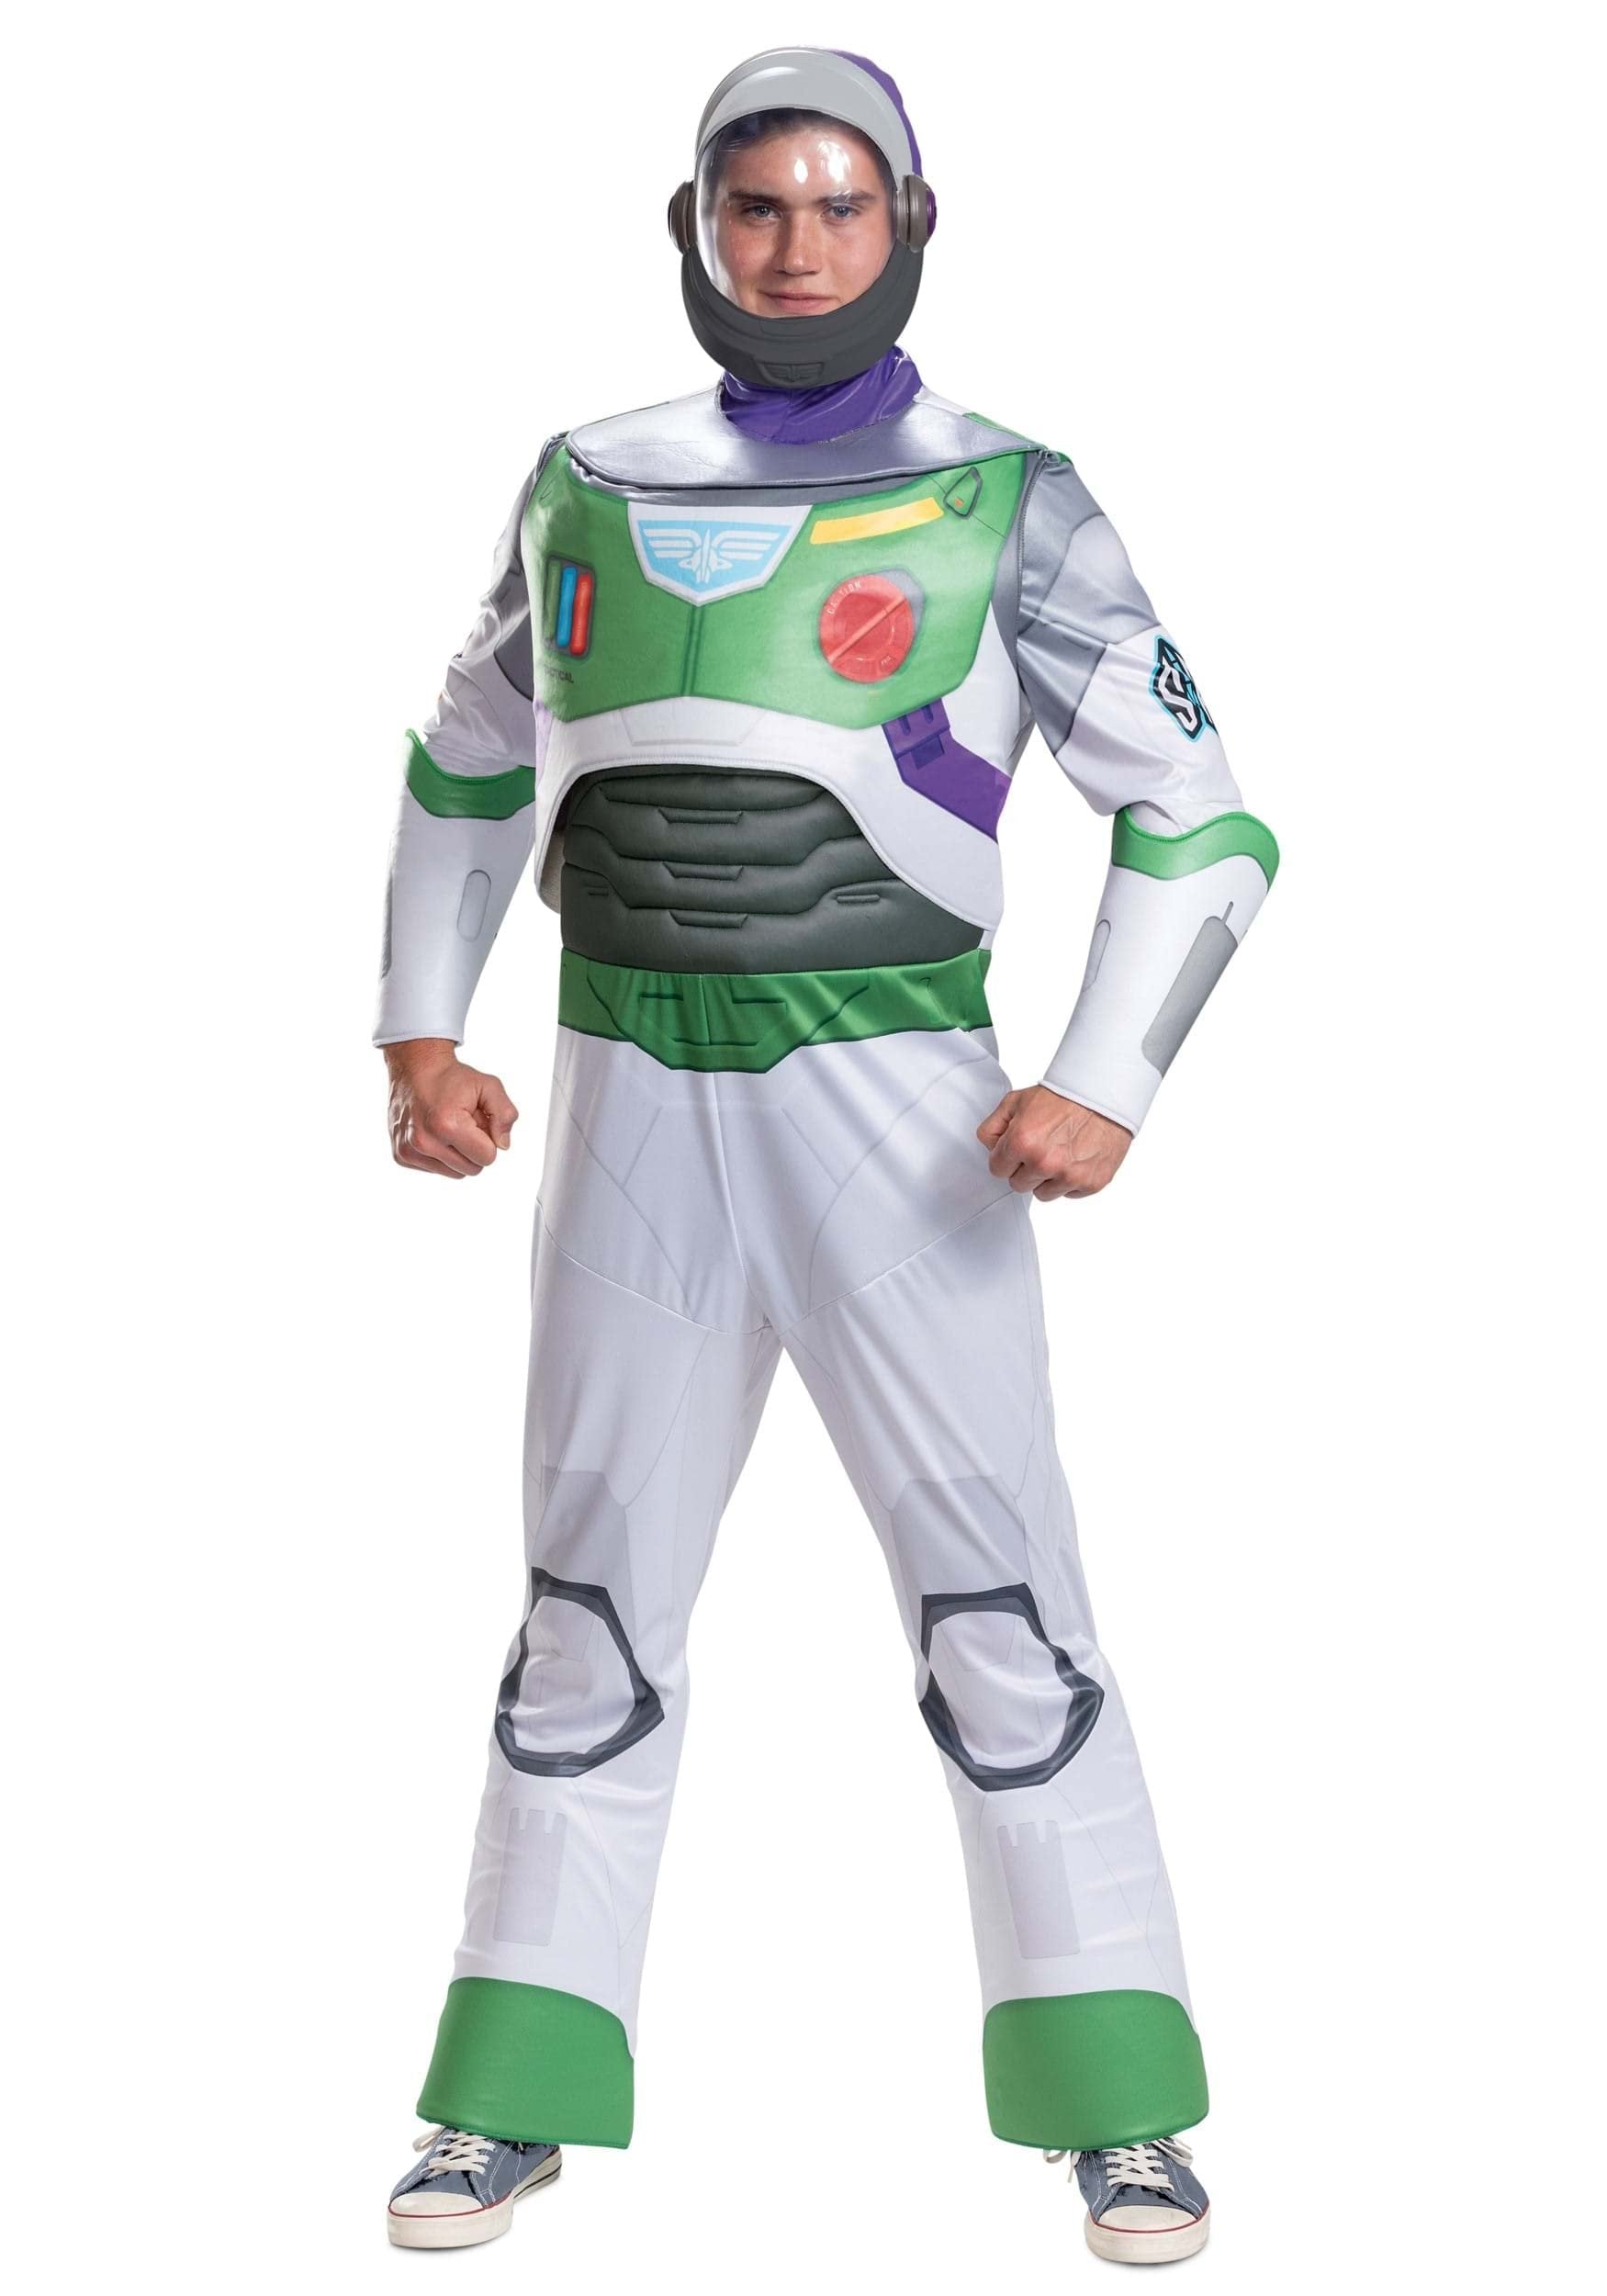 Disguise mens Disney Pixar Lightyear Buzz Space Ranger Costume, Official Disney Lightyear Outfit Adult Sized Costumes, As Shown, Men s Size Large 42-46 US